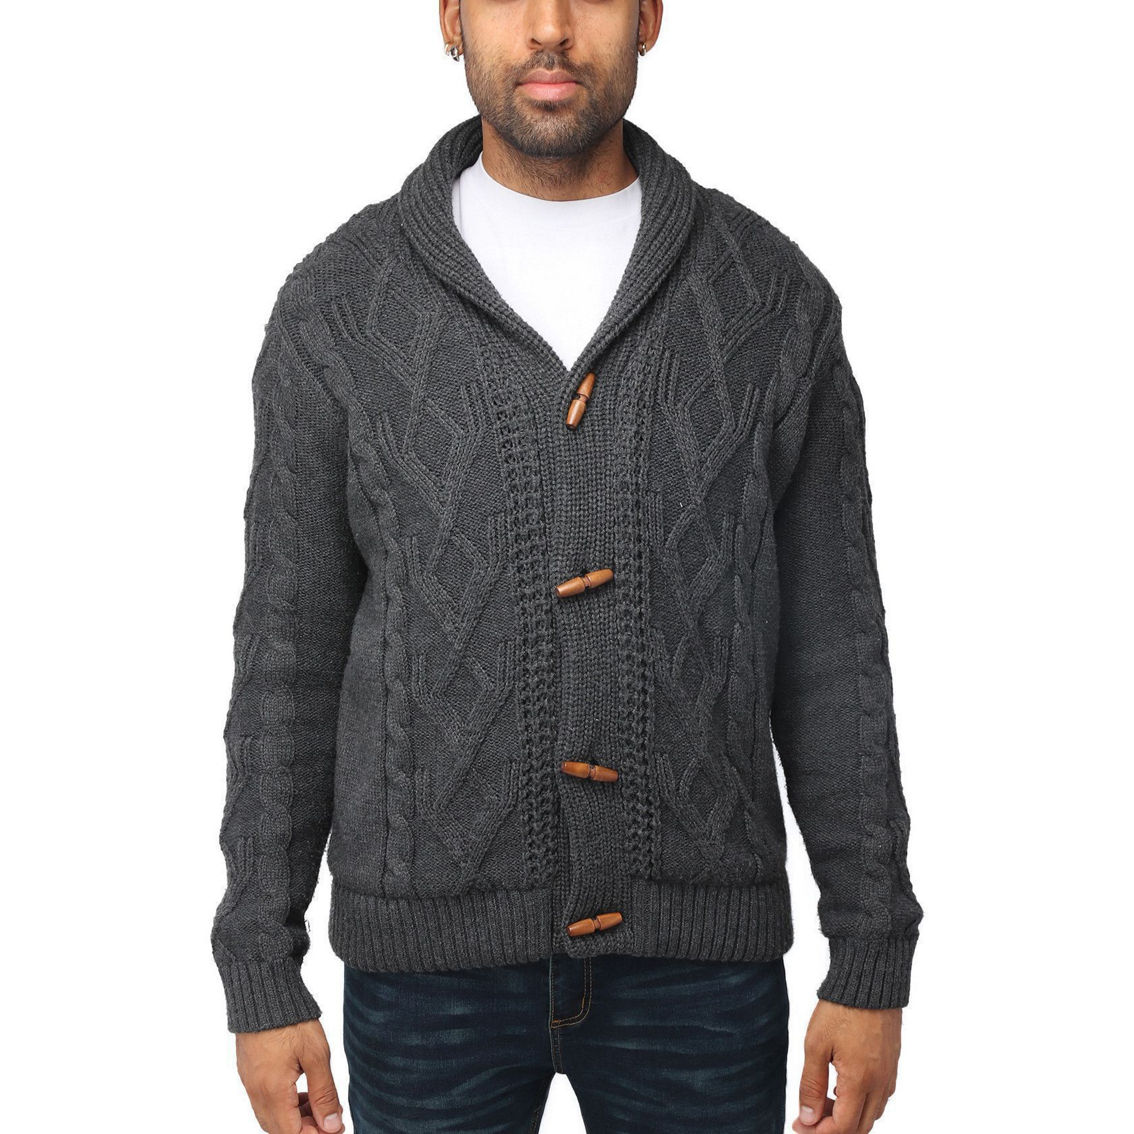 Men's Shawl Collar Cable Knit Cardigan Sweater With Sherpa Lining - Image 3 of 3